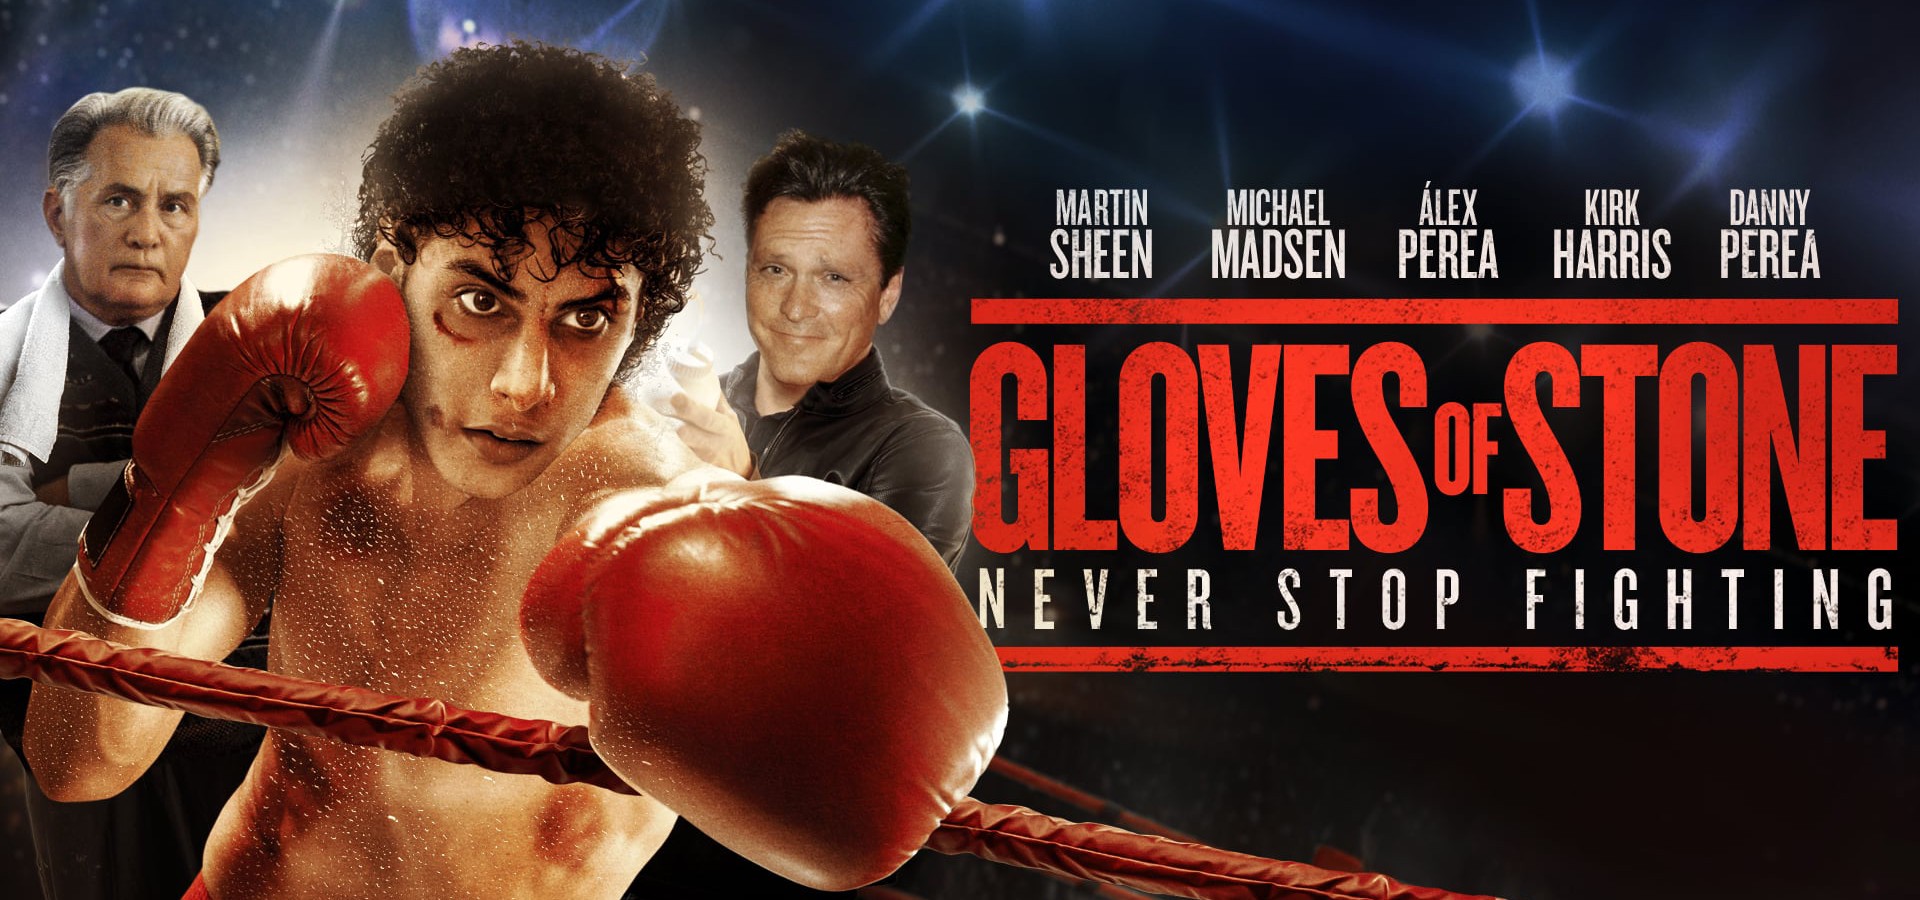 Gloves of Stone